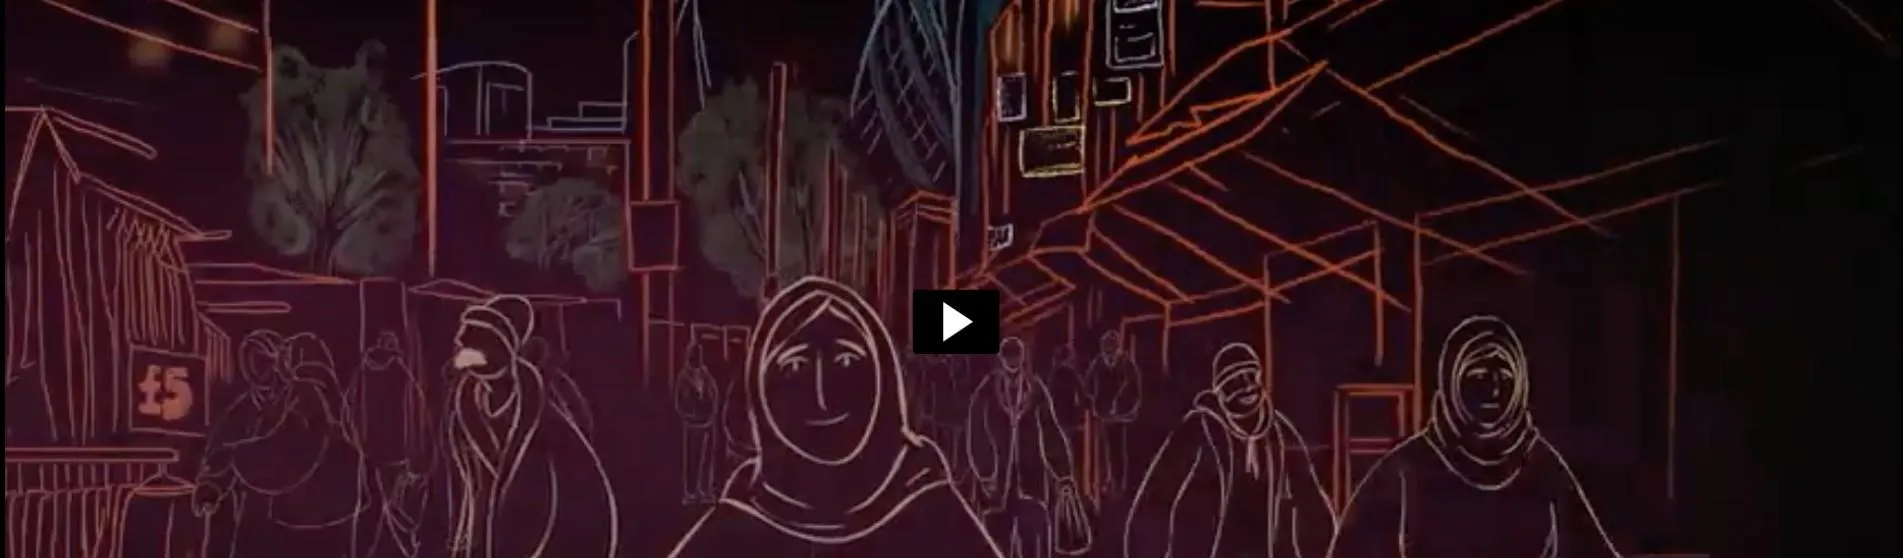 Screenshot of video from Coronawareness project showing illustration of a woman in east London